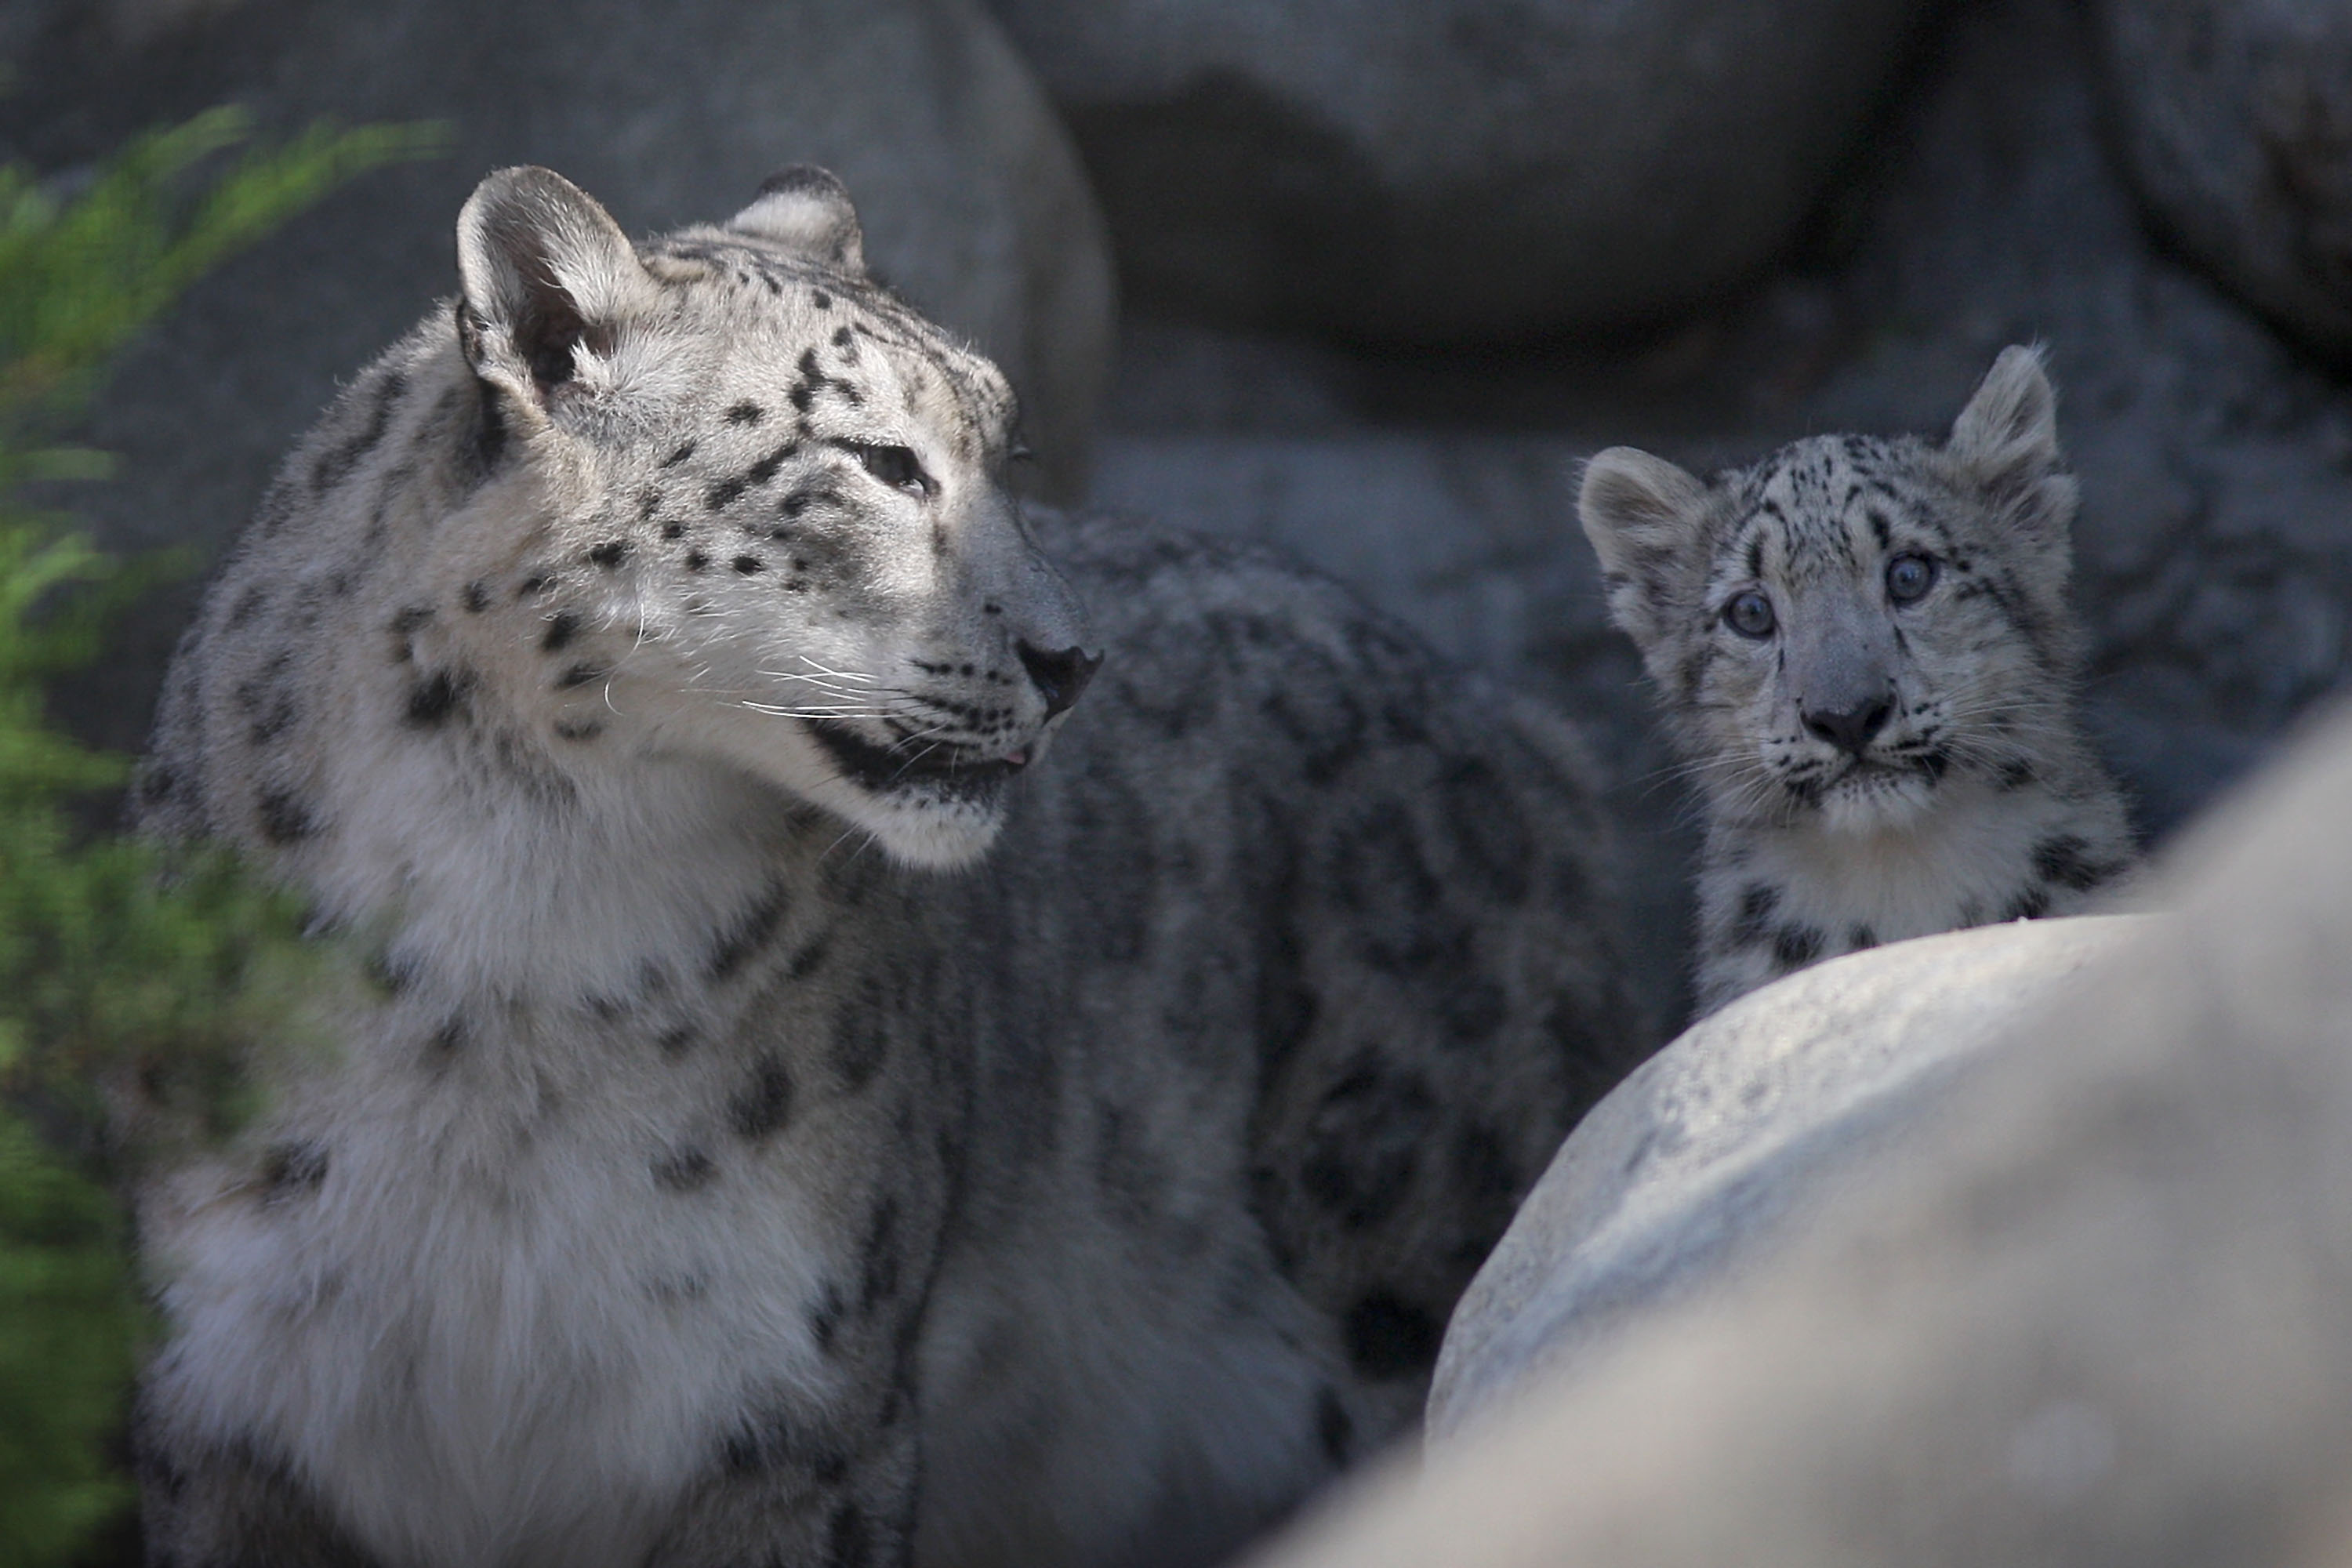 An Essential Guide To The Los Angeles Zoo - CBS Los Angeles